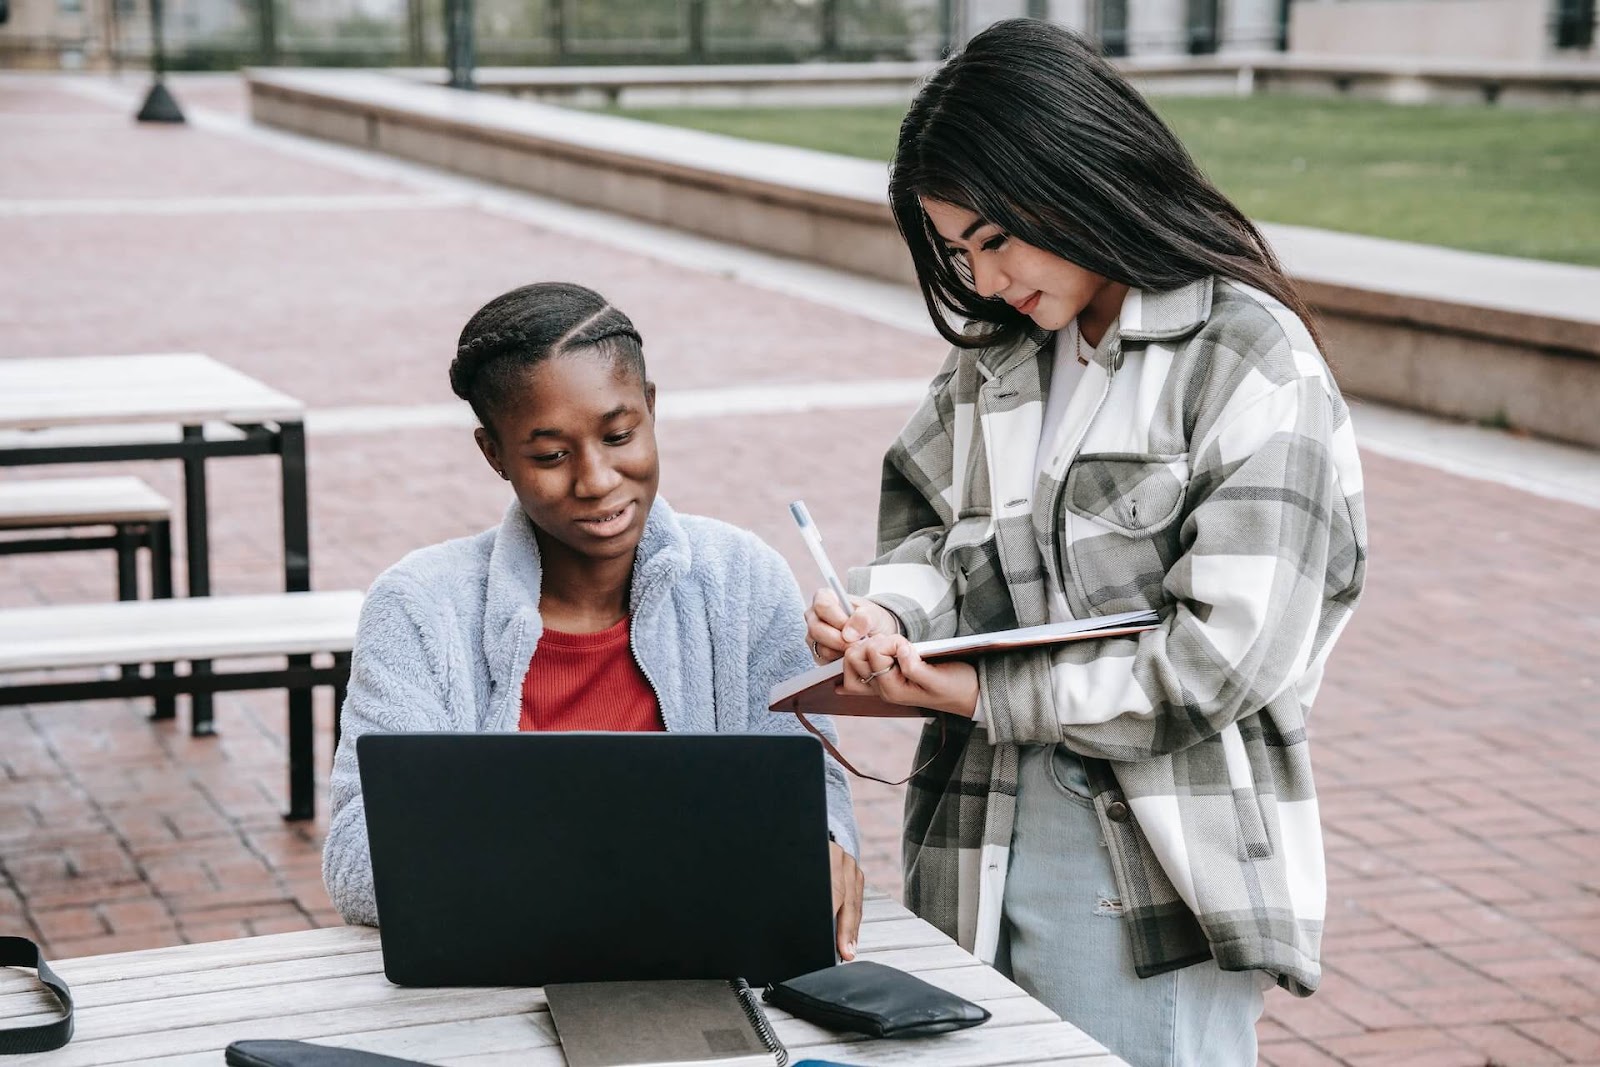 Two students taking notes on a laptop outside